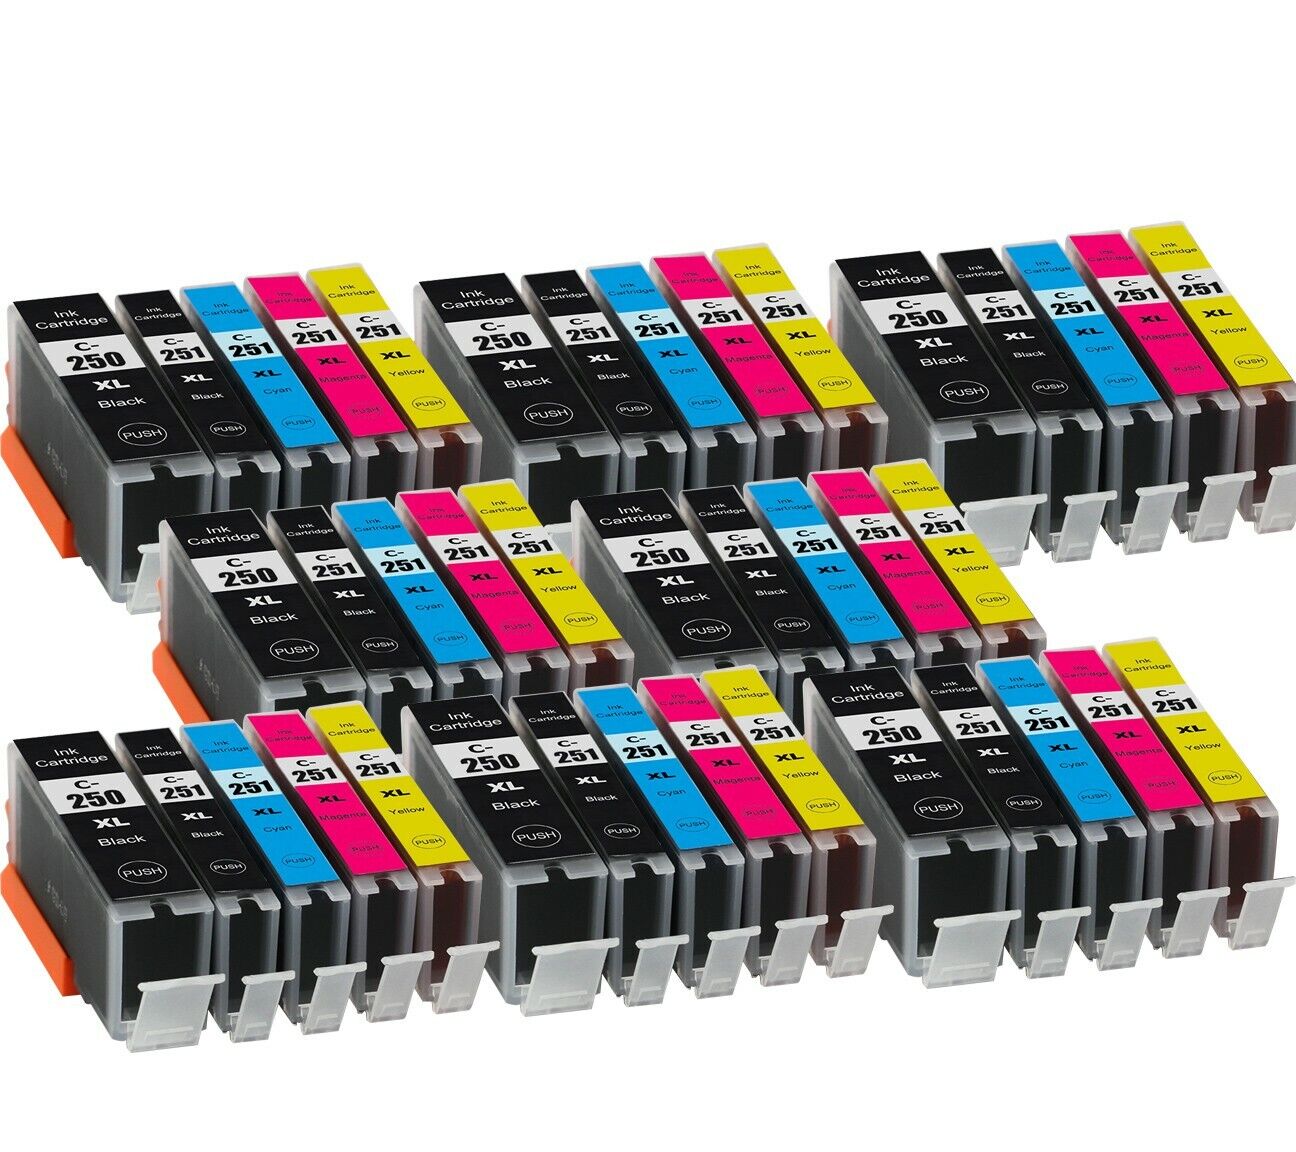 40P Replacement Ink Set for Canon PGI-250XL CLI-251XL MX920 MG5520 MG6420 iP7220